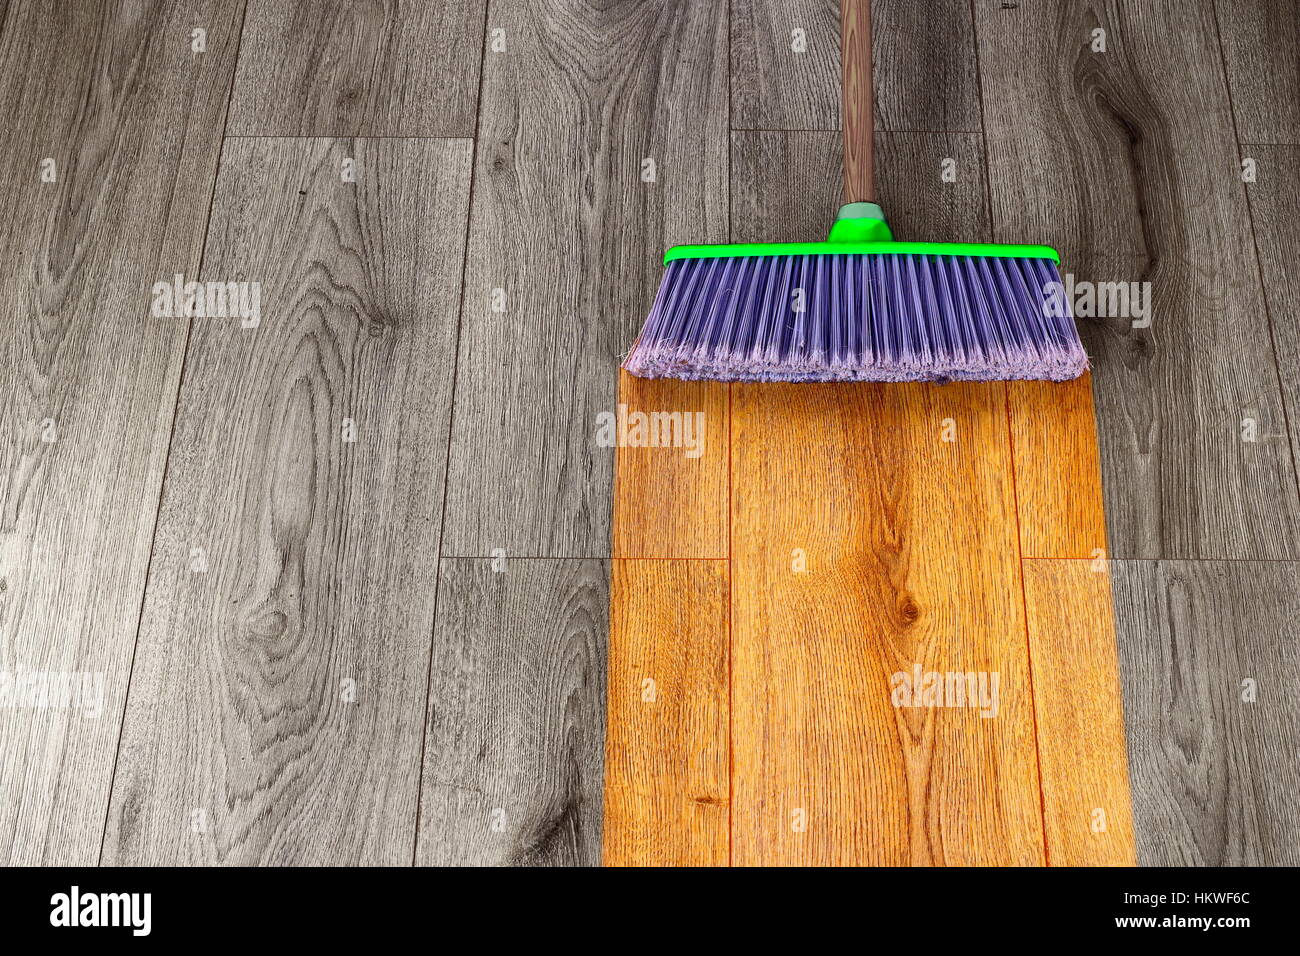 sweeping out wooden parquet with green plastic broom Stock Photo